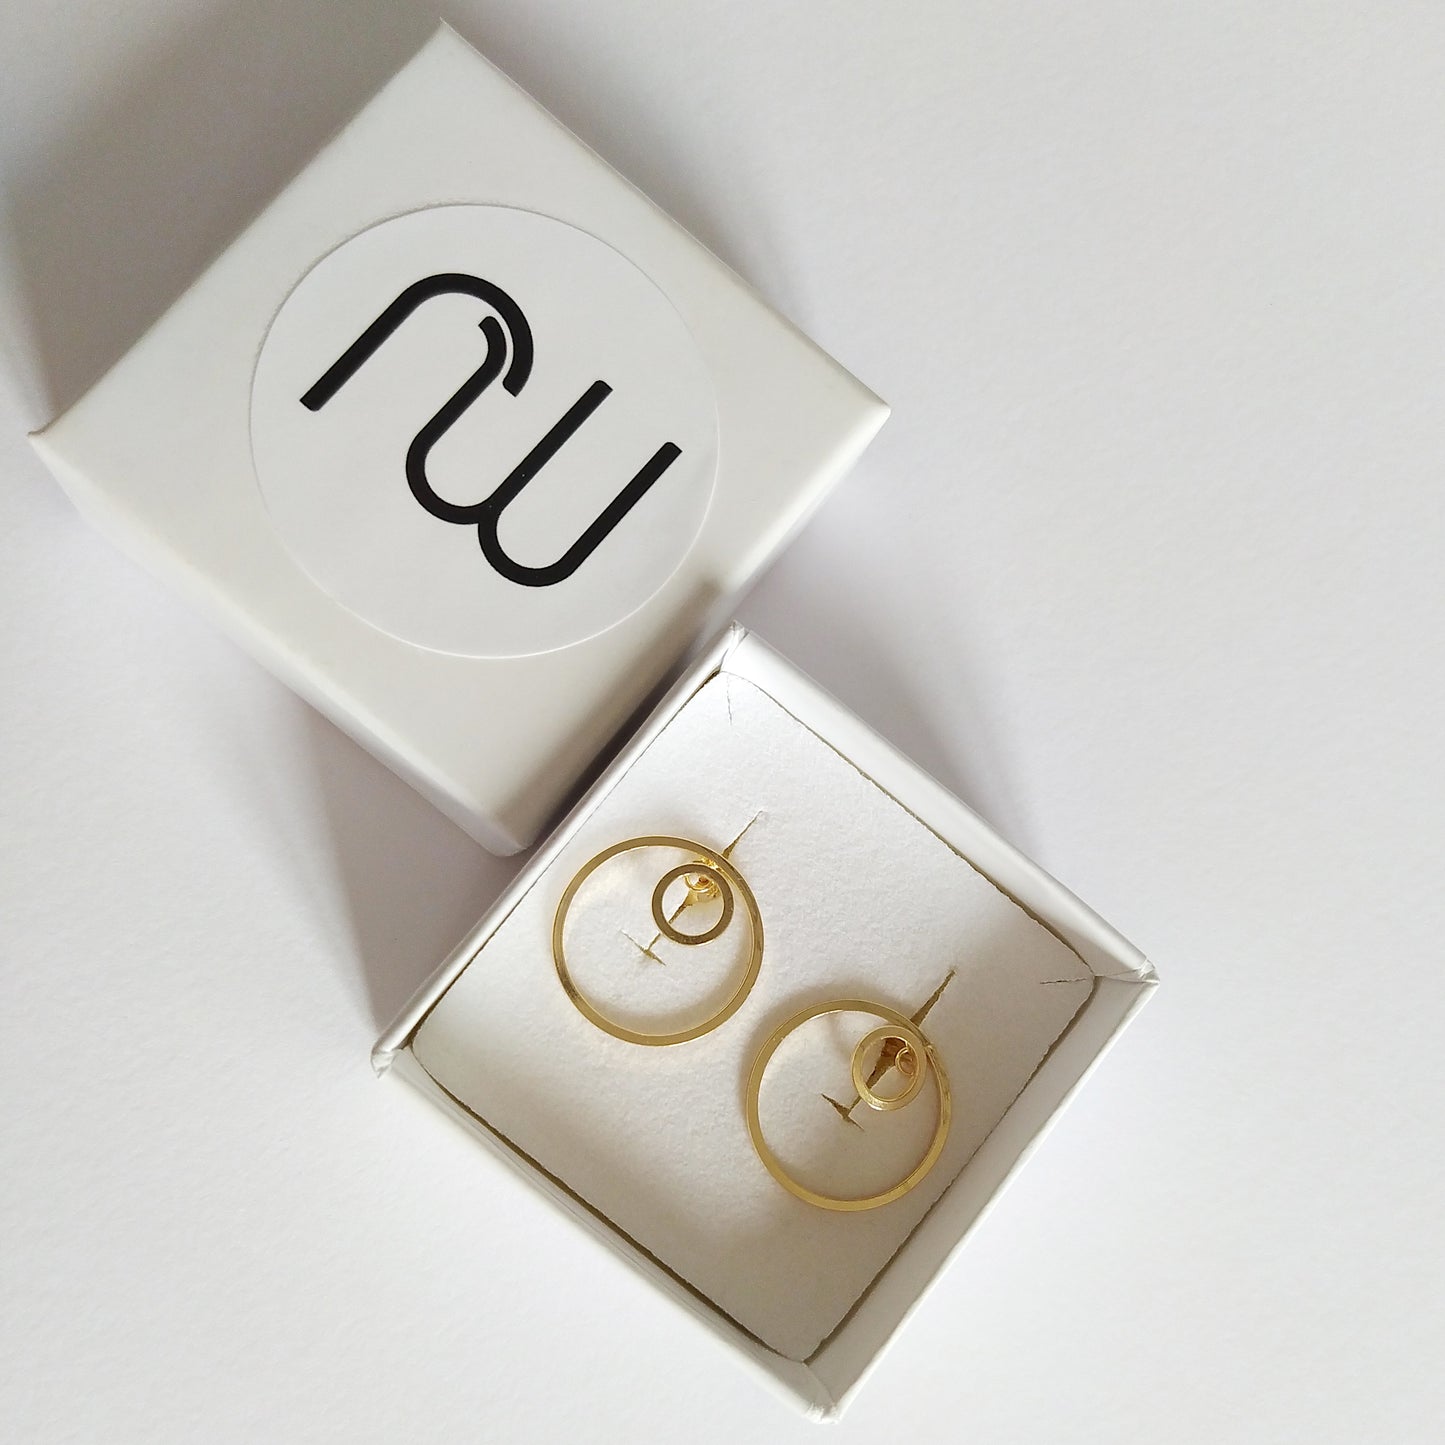 Lina | golden jacketed double circle earrings